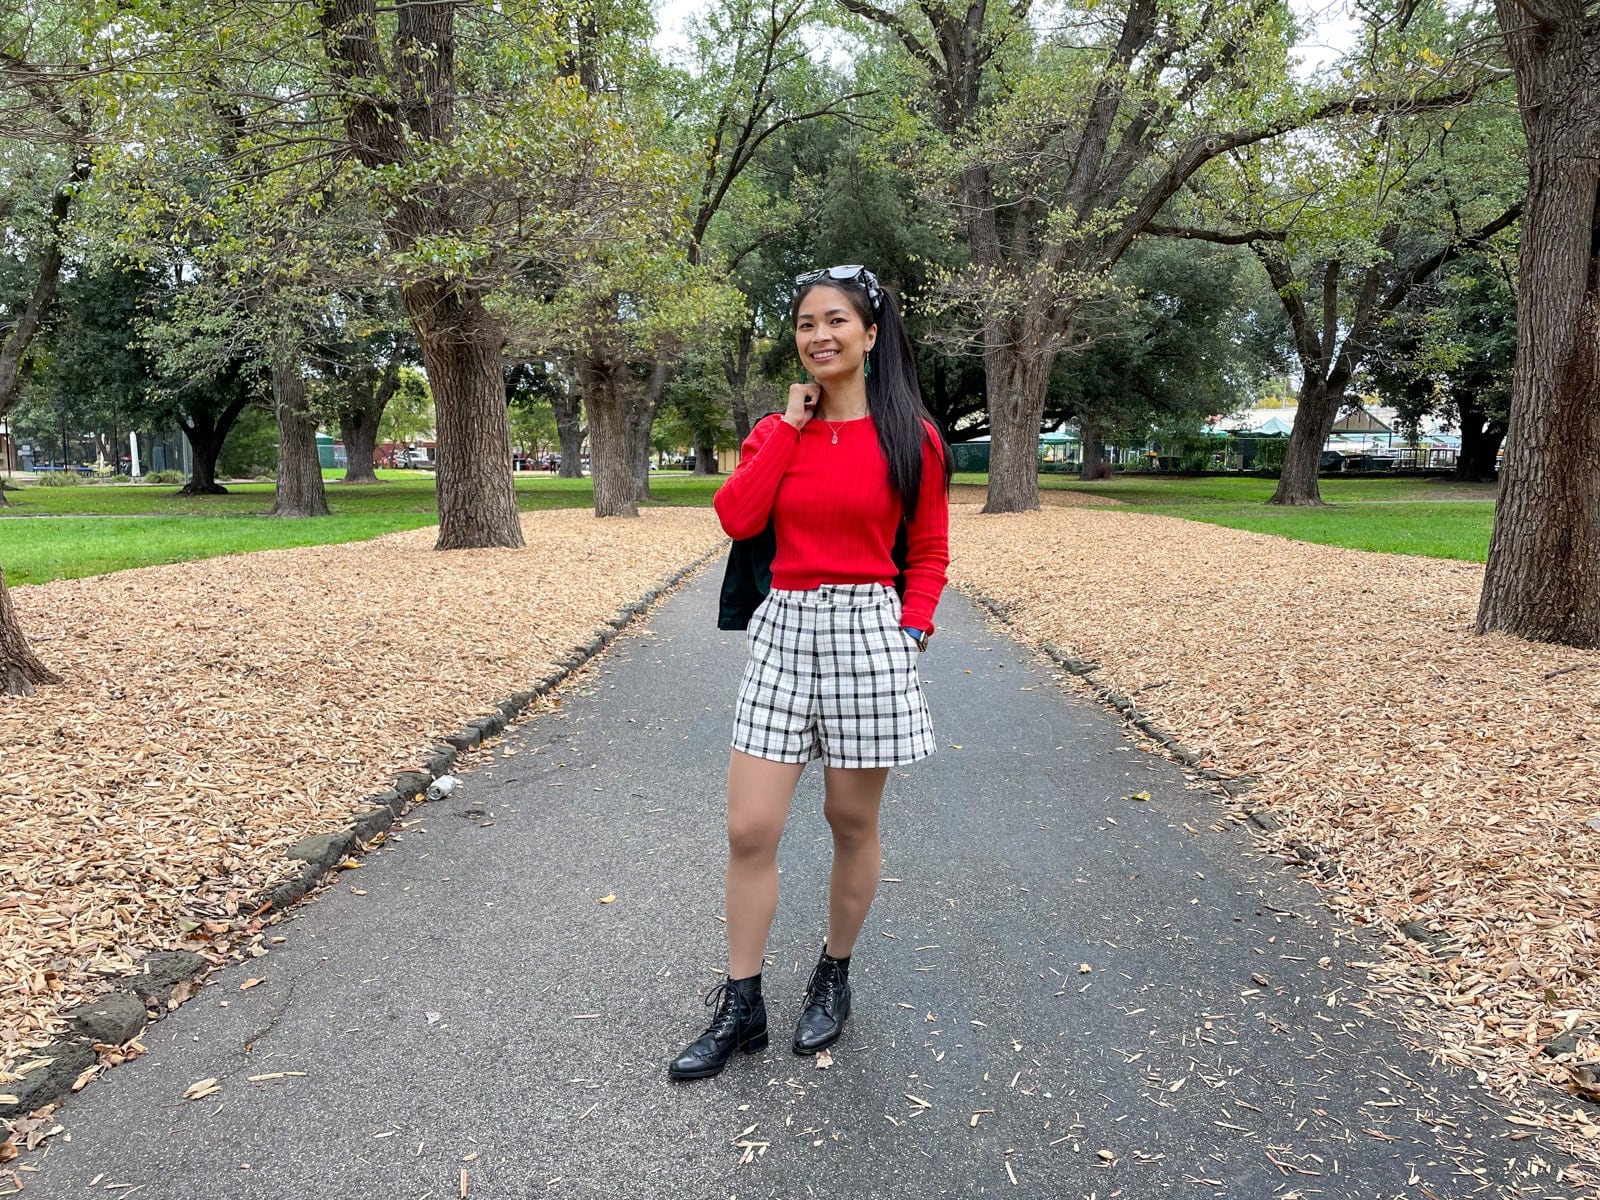 An Asian woman standing in a park with a concrete path going between planted trees. She has her long dark hair tied in a ponytail and a black-and-white gingham scrunchie. She is wearing a long sleeved red top with a black bomber jacket, black-and-white checkered shorts, and black lace-up boots.